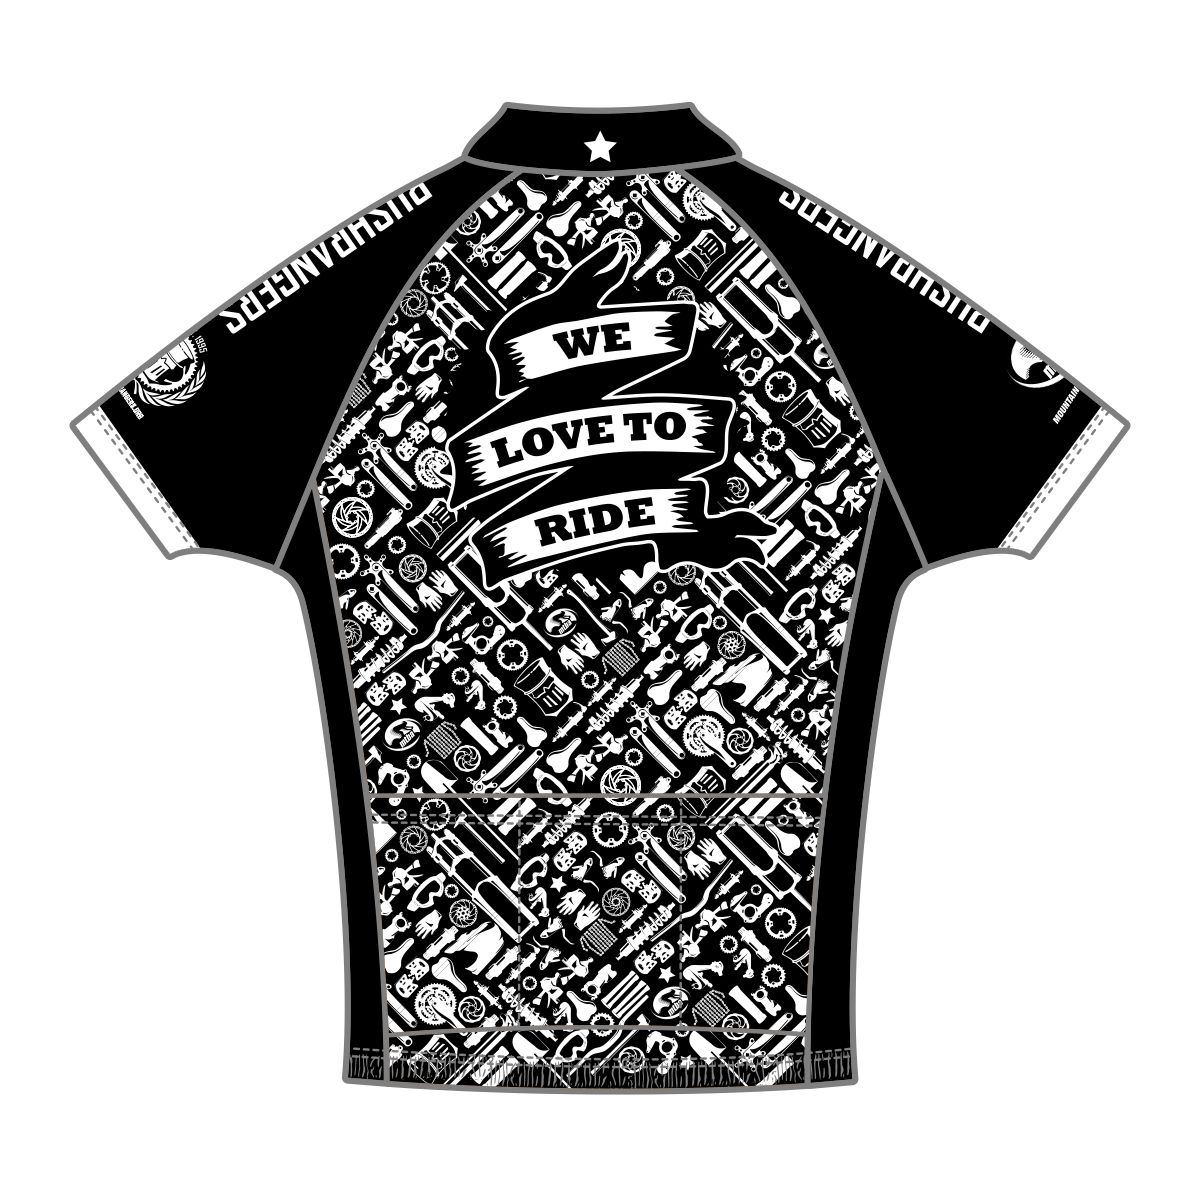 black and white cycling jersey